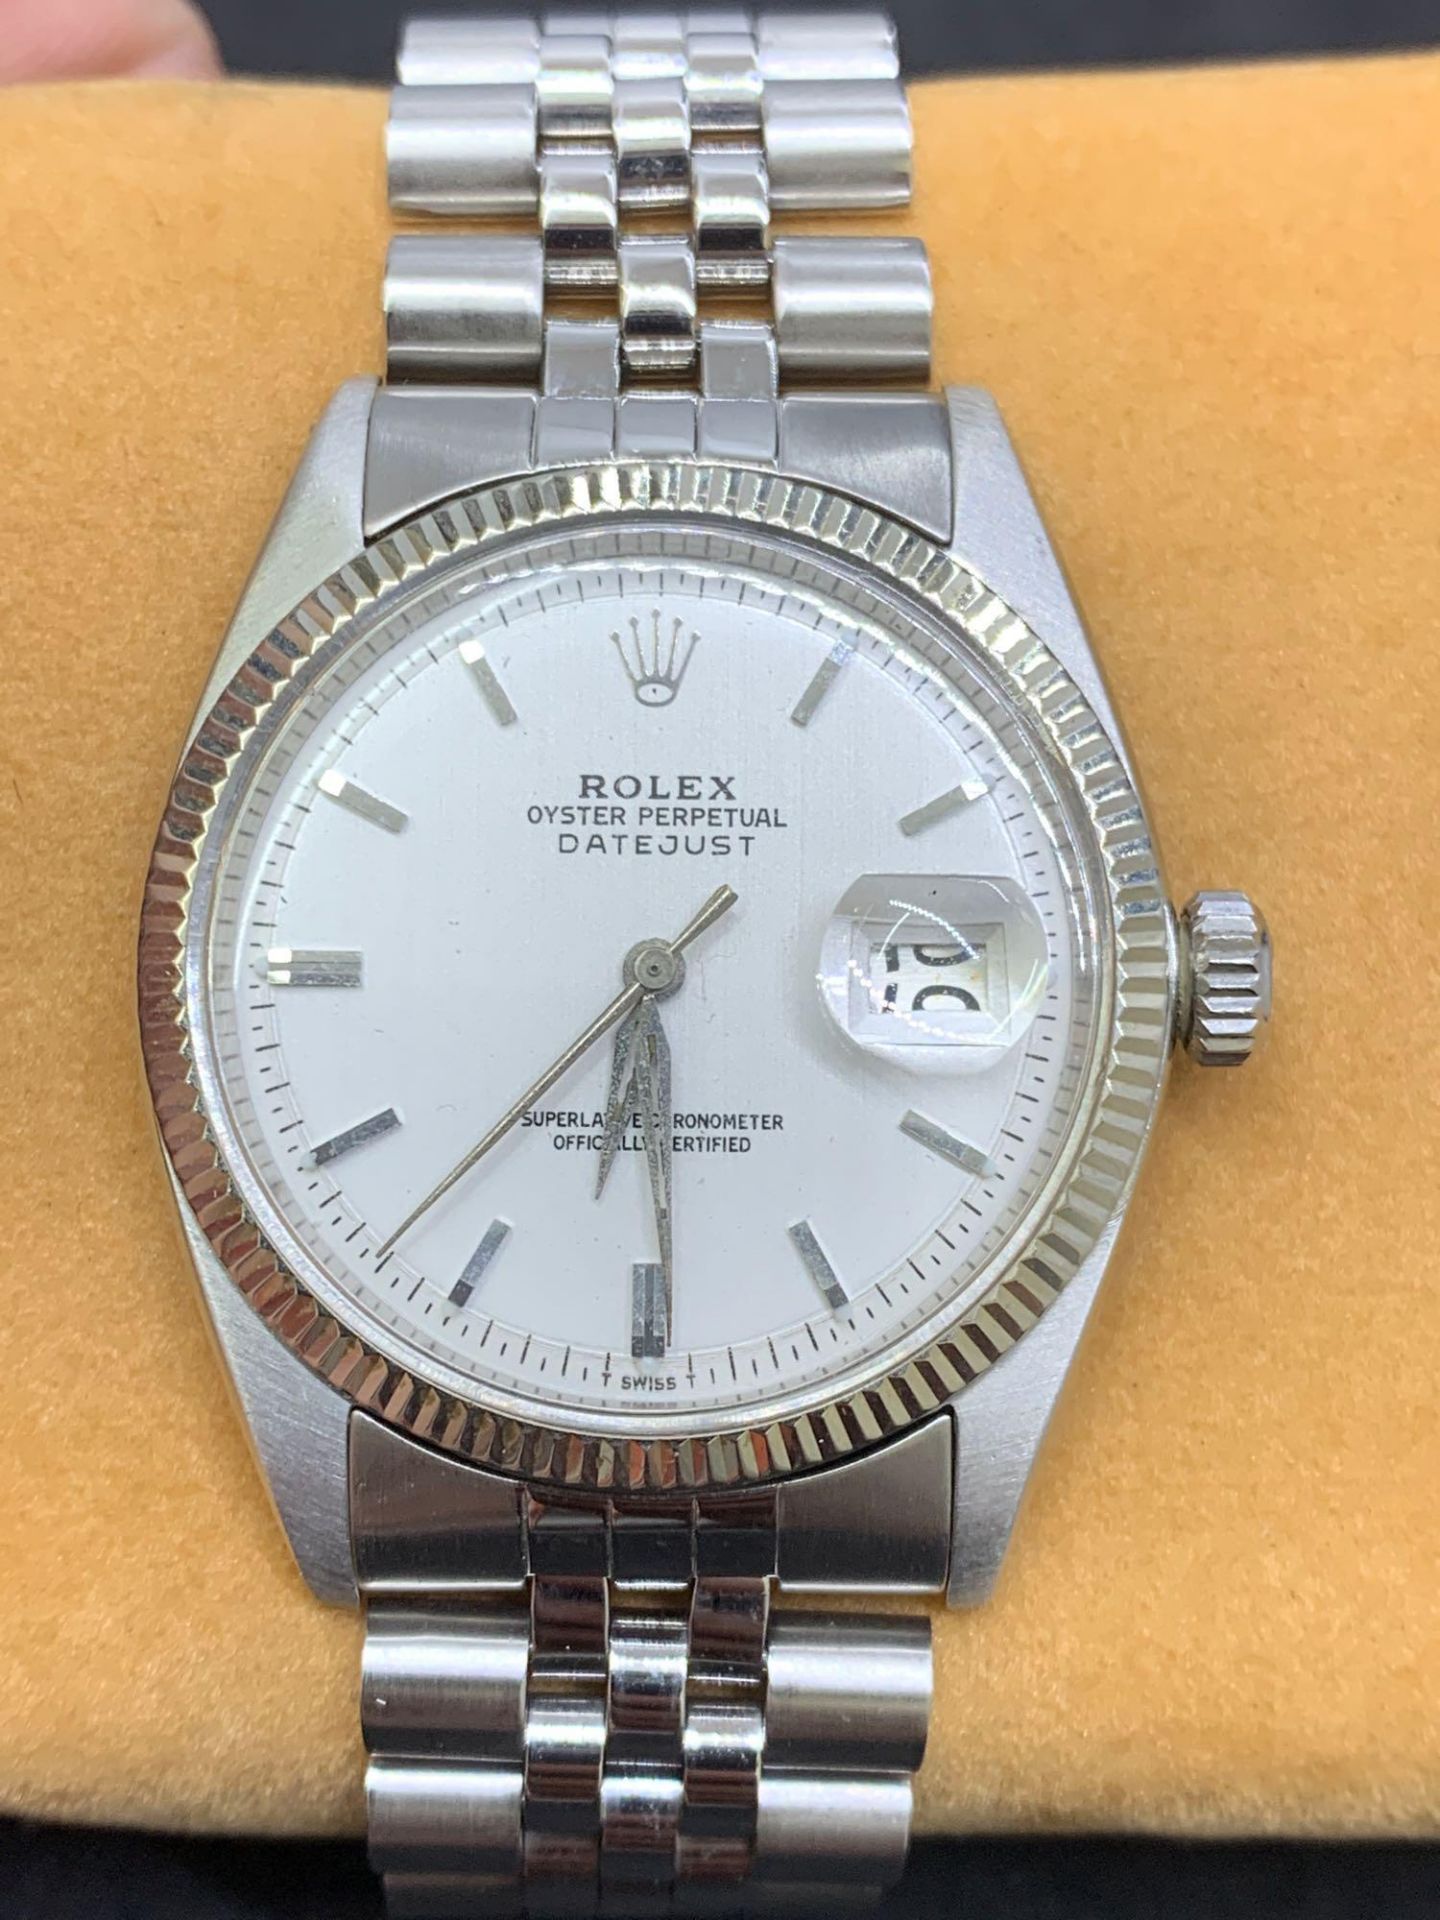 Vintage 1961 Rolex Datejust Stainless Steel & White Gold Watch Silver dial 36mm